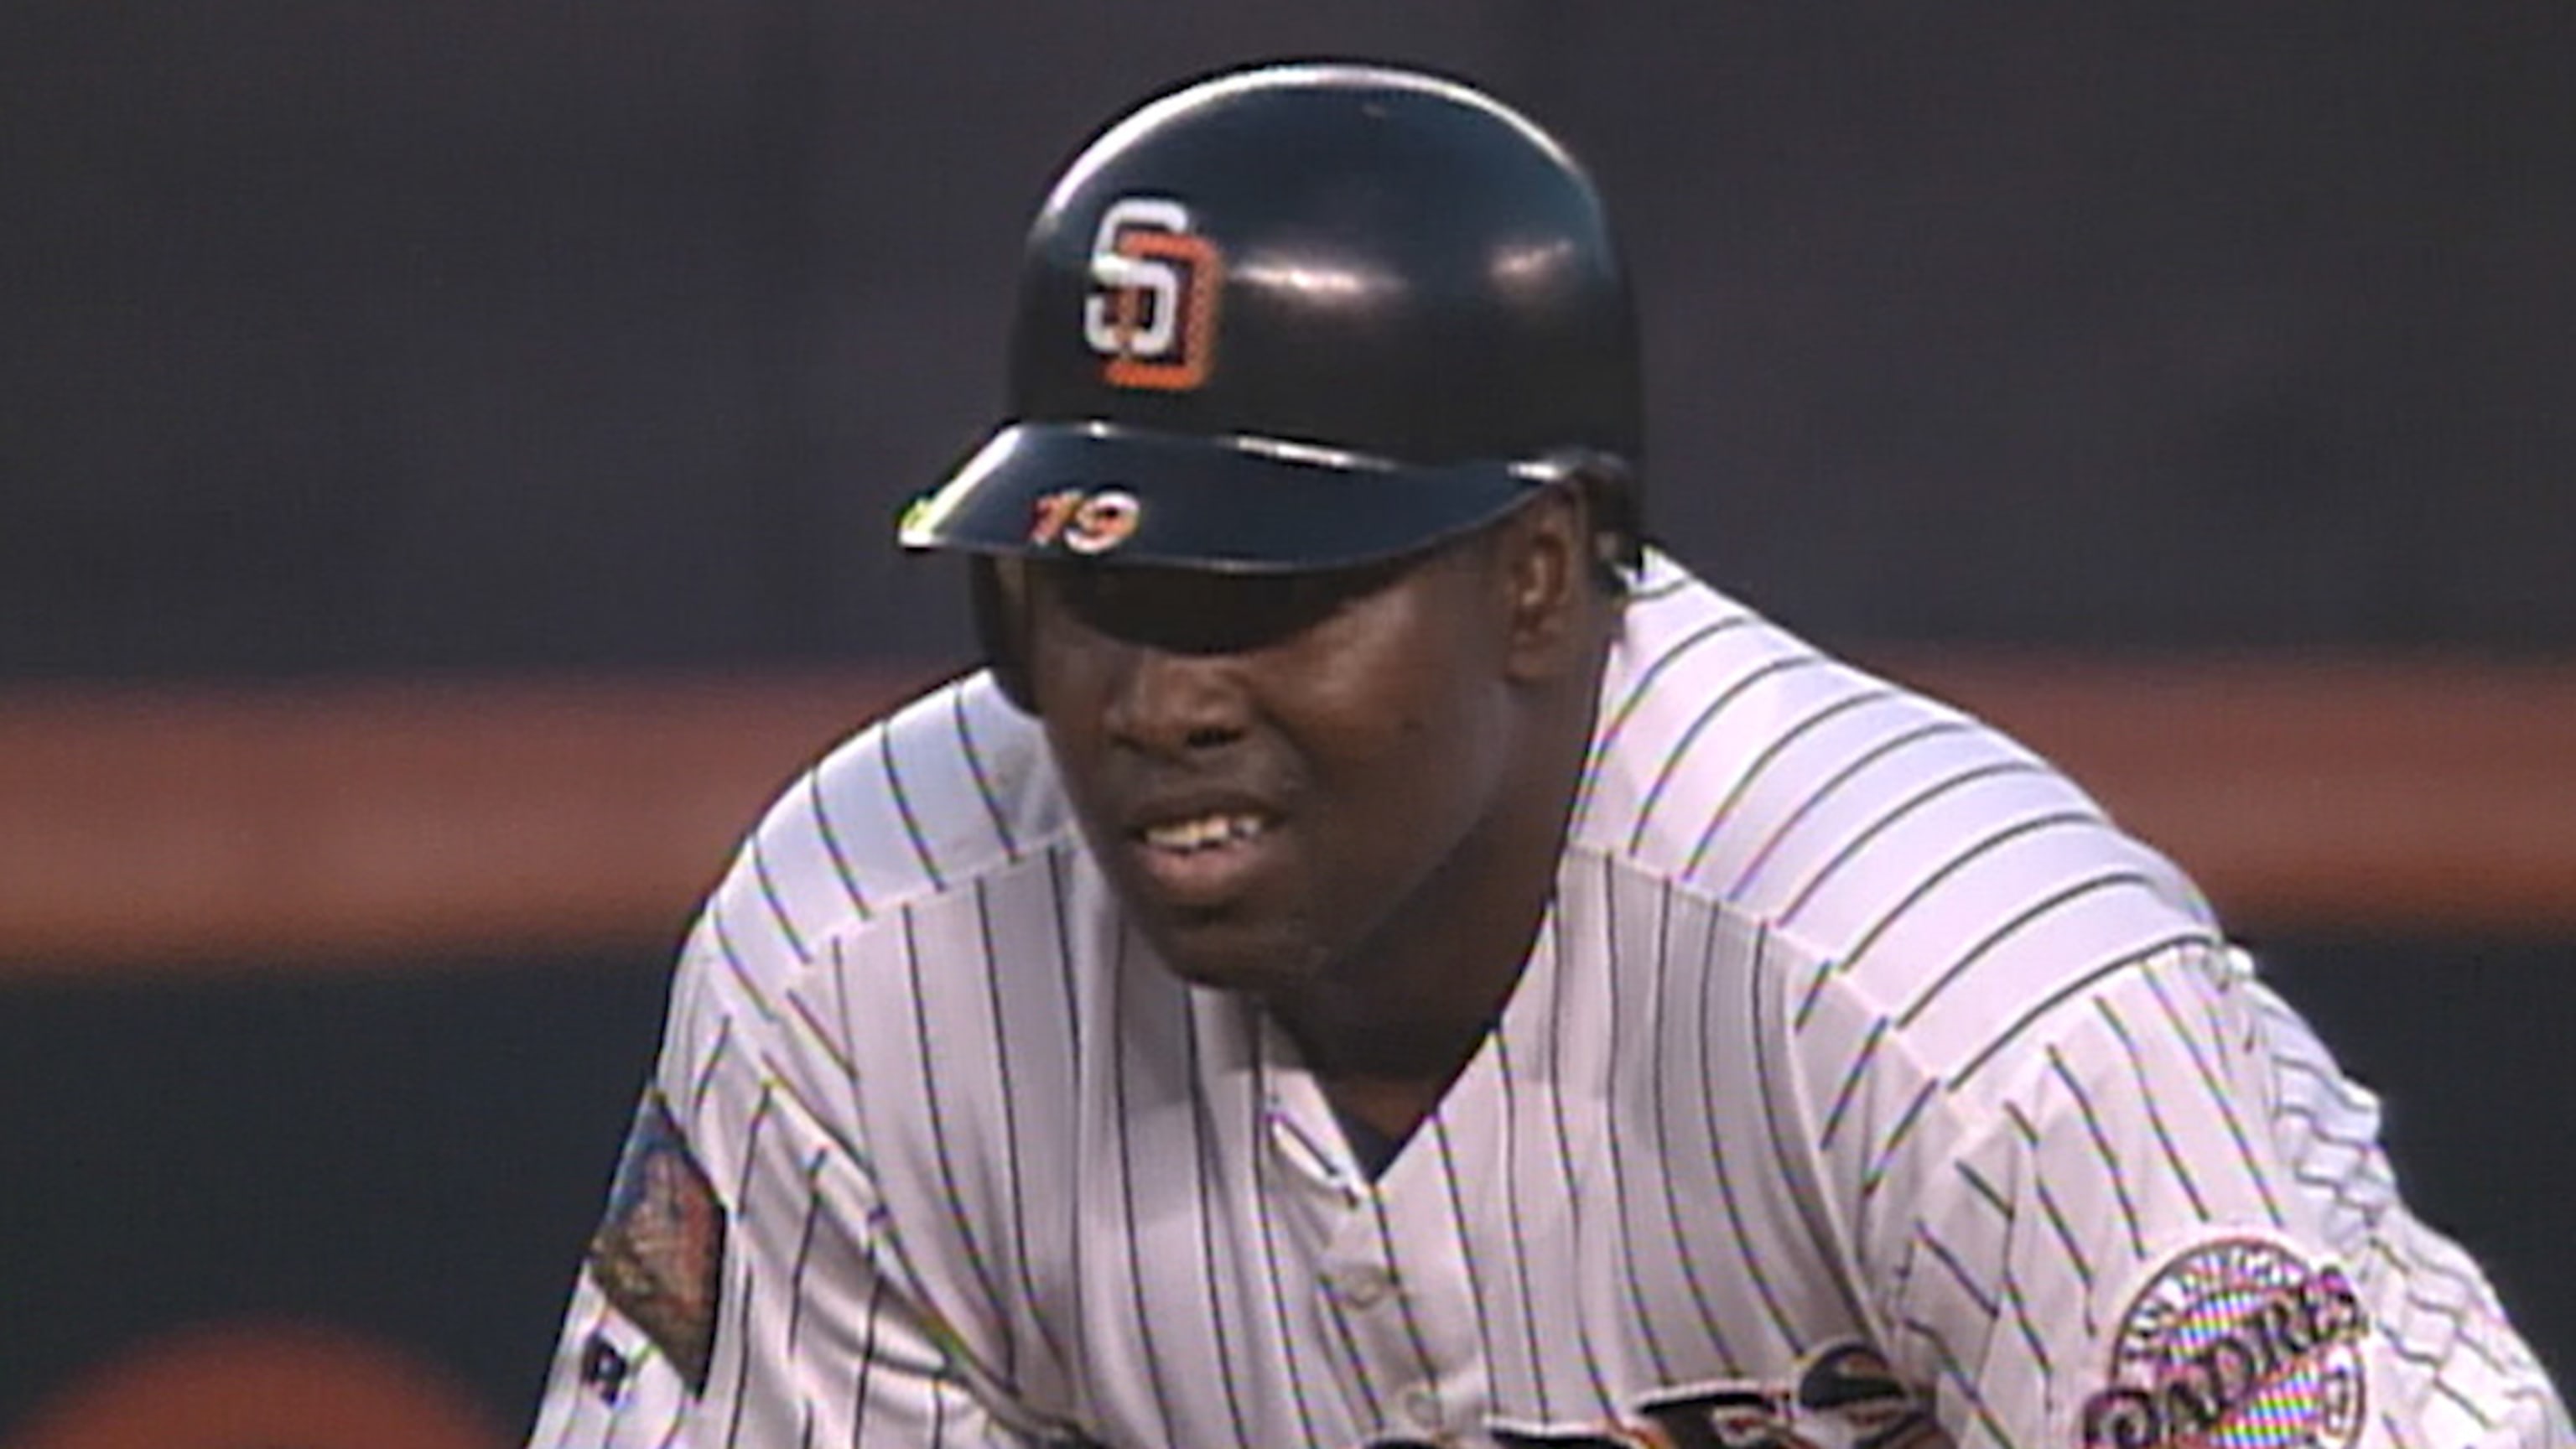 Wild stat! Gwynn is the best contact hitter of my lifetime! : r/mlb